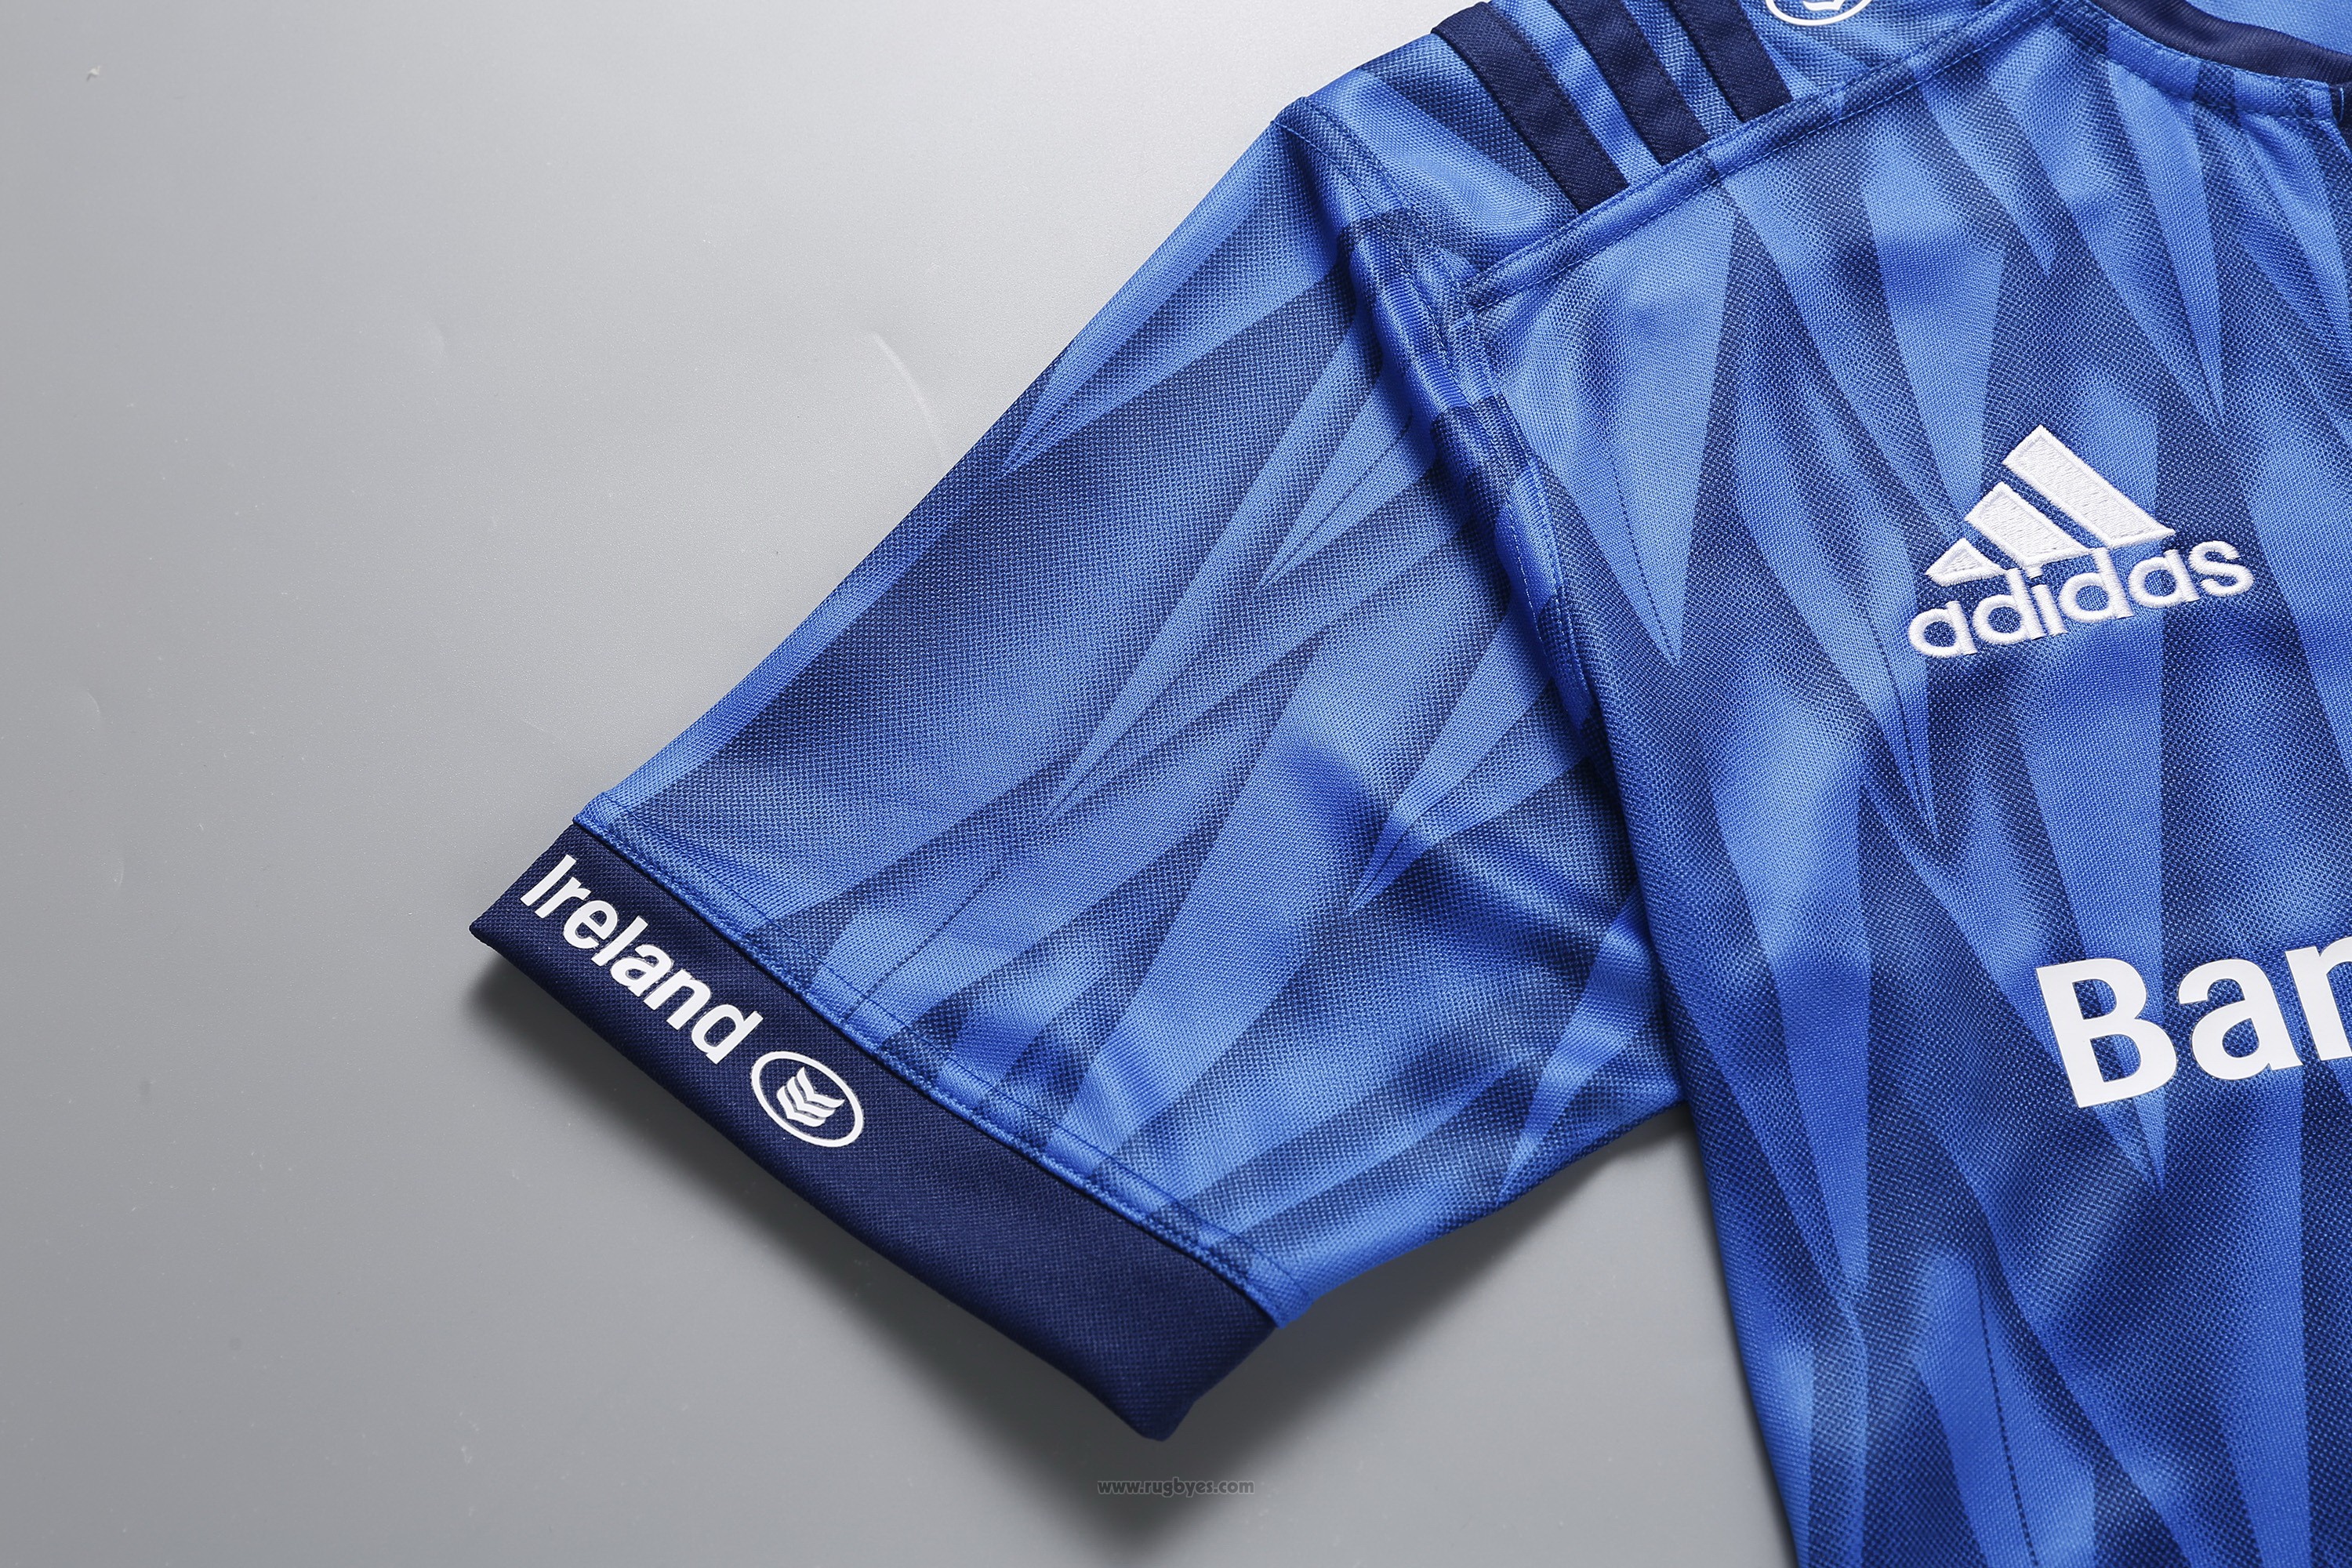 Camiseta Leinster Rugby 2018-2019 Local